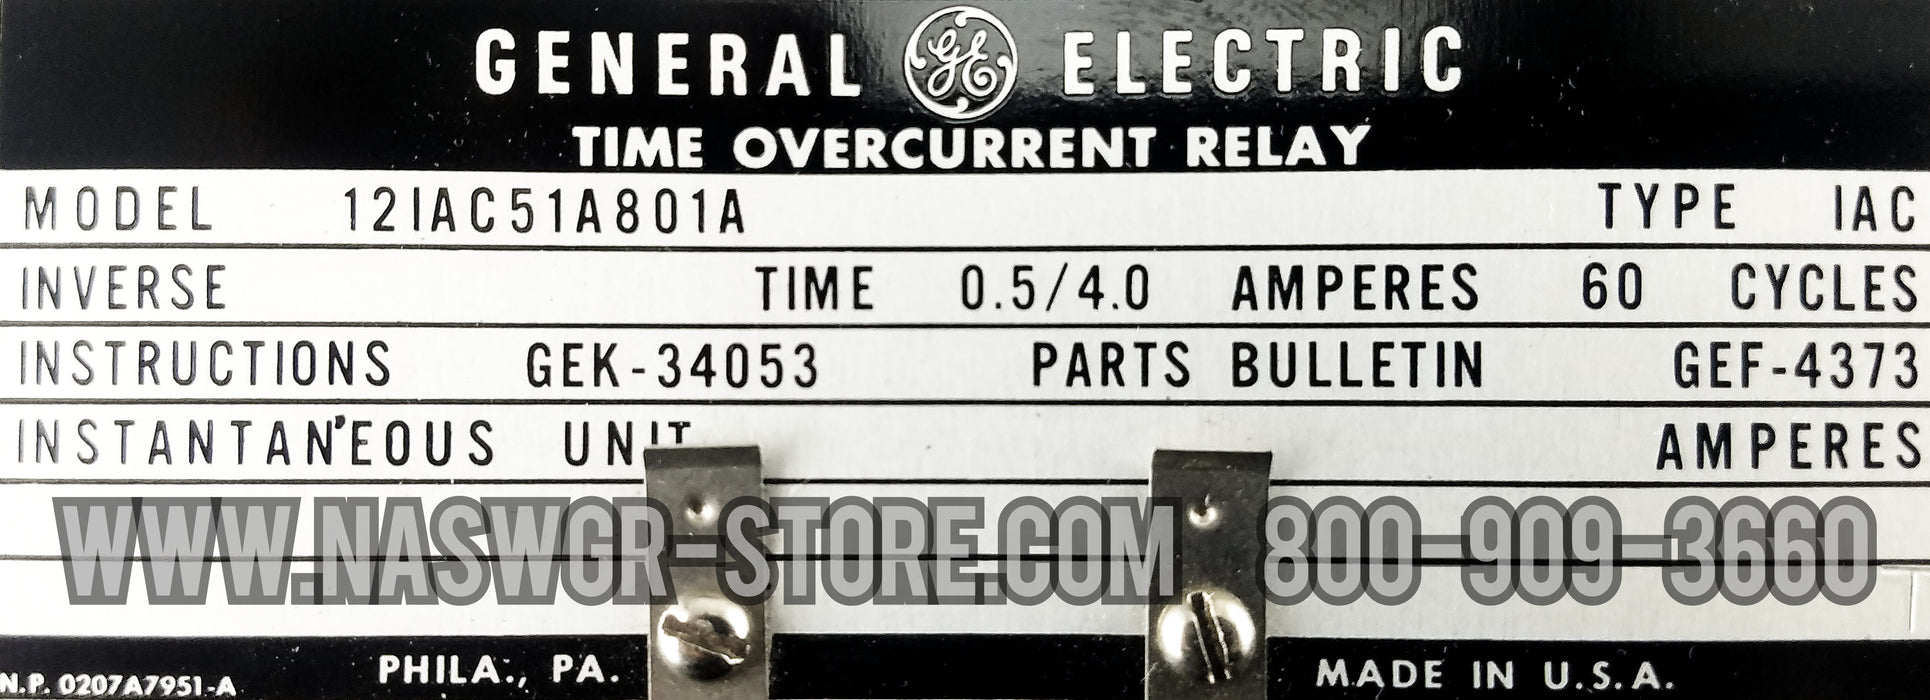 General Electric 12IAC51A801A Time Overcurrent Relay